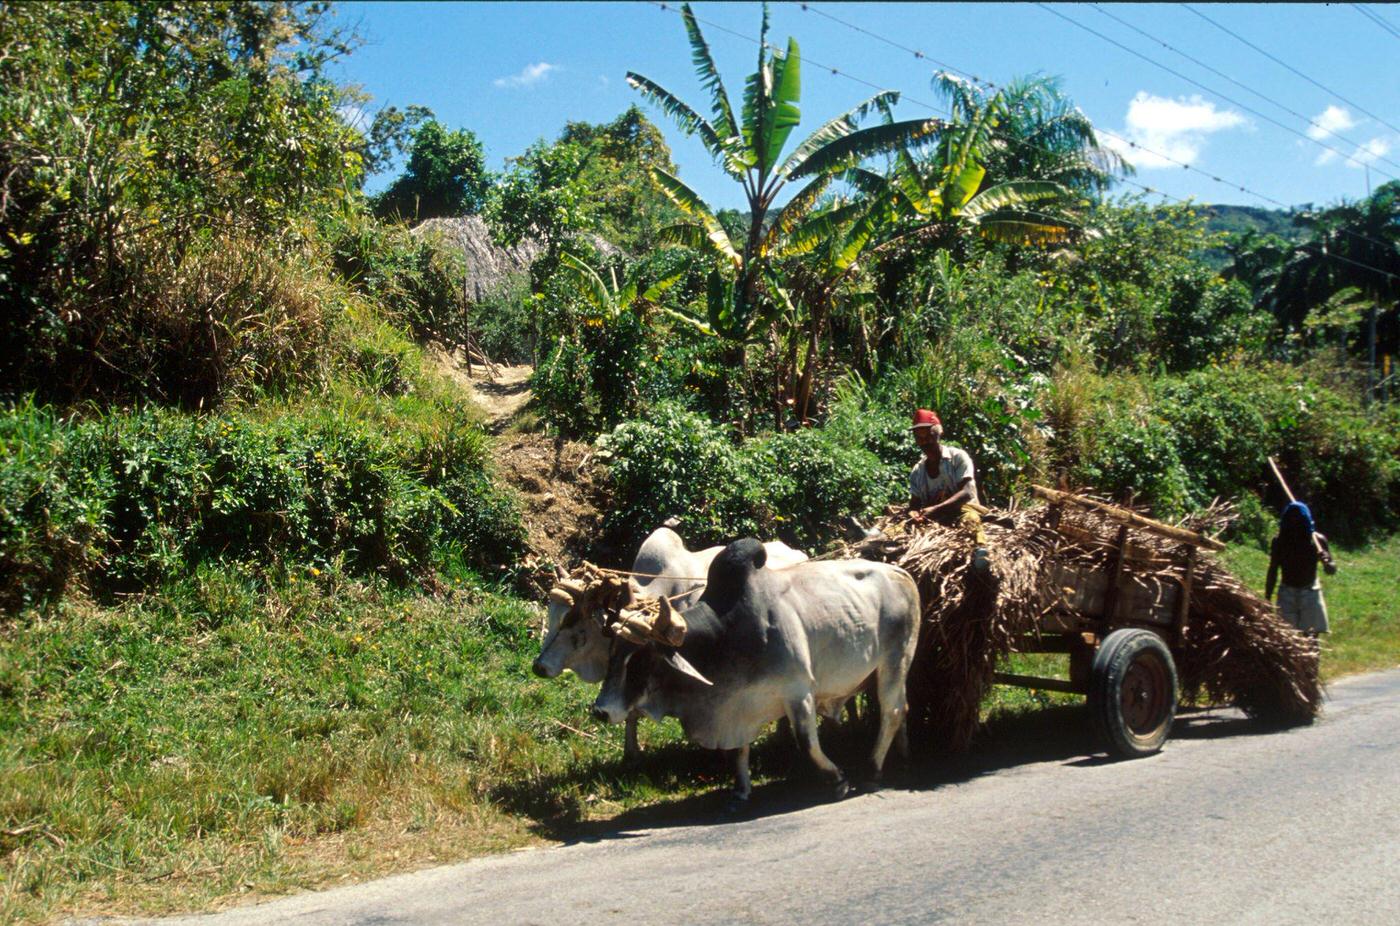 Cuban peasant driving a cart drawn by two oxen in Holguin, Cuba, 1990.